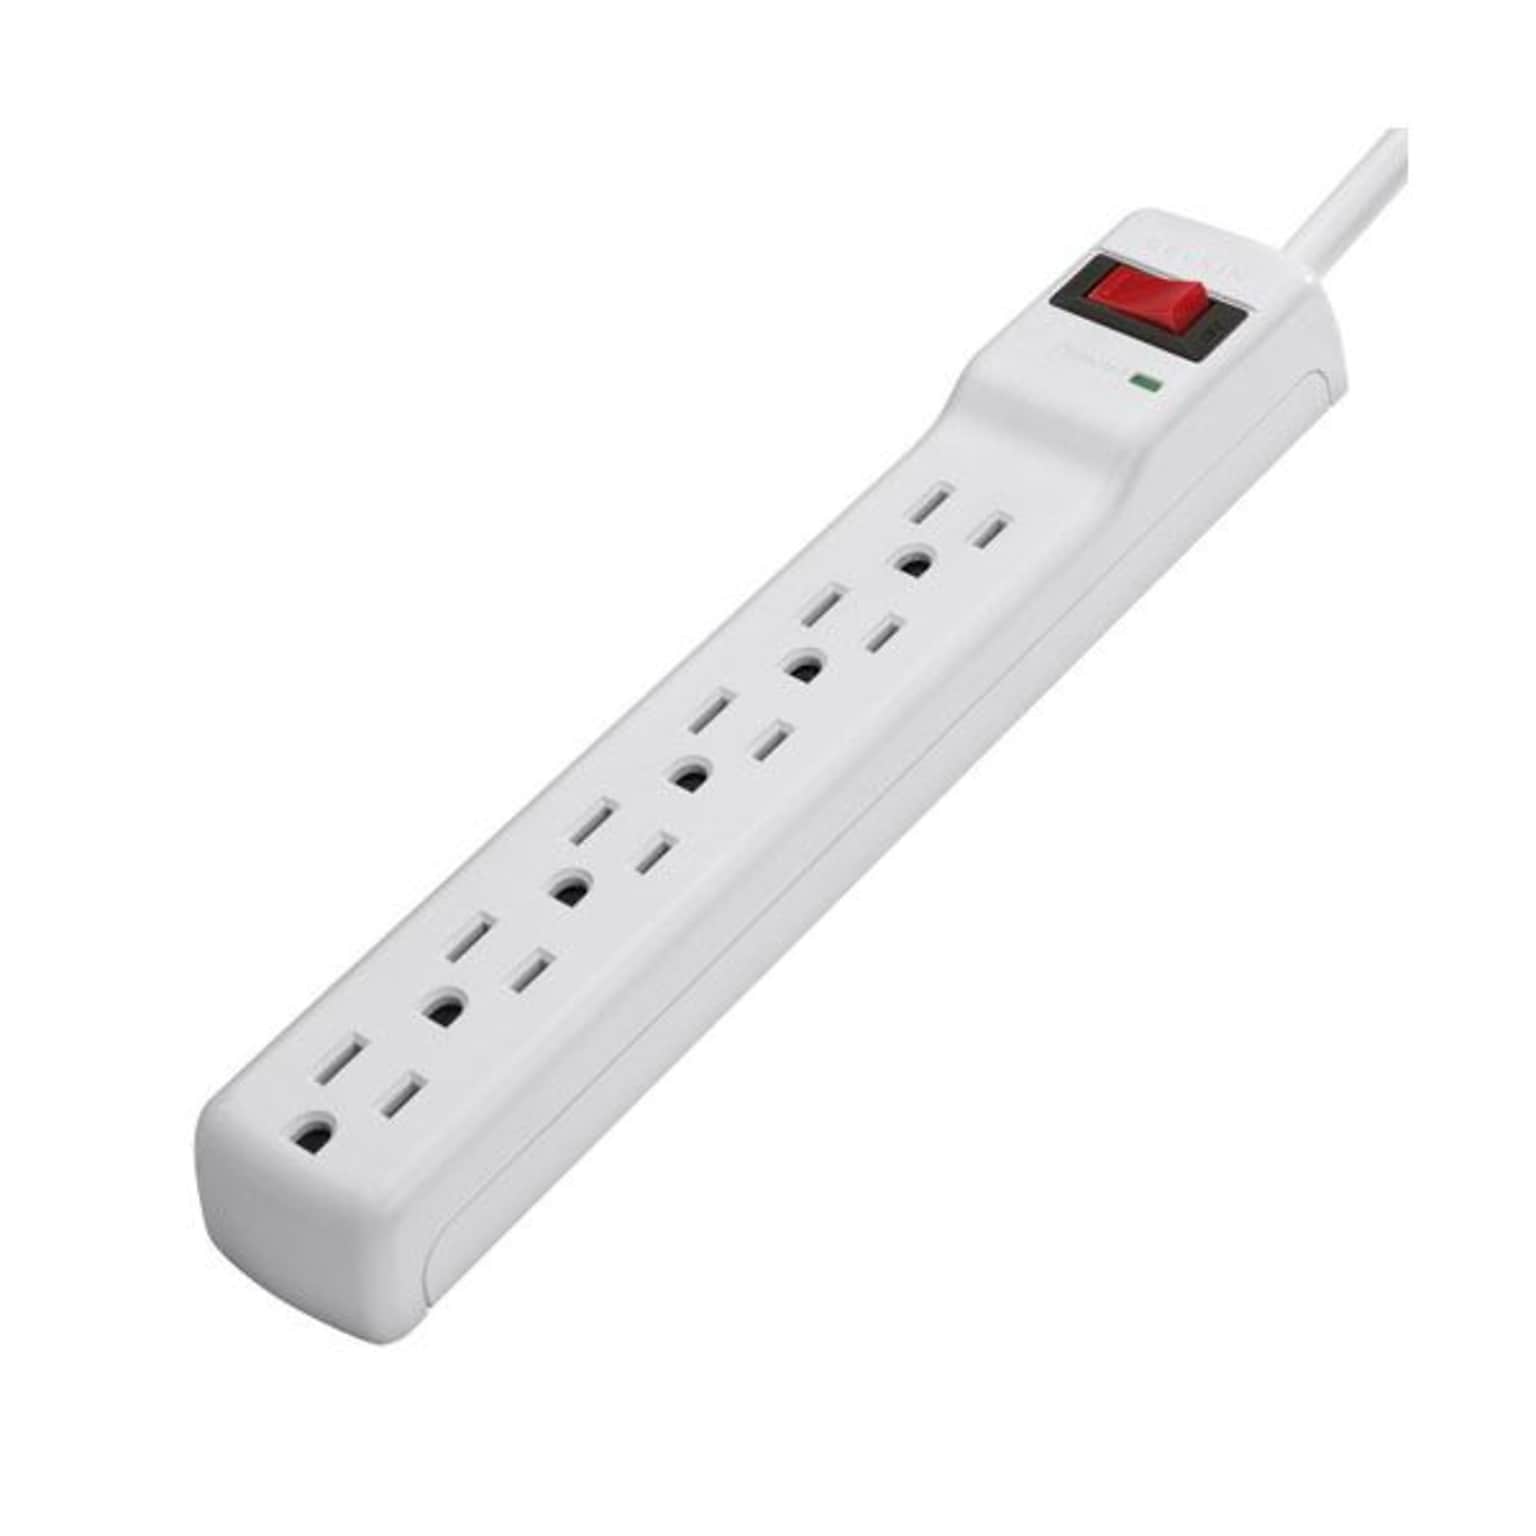 Belkin™ F5C047 6-Outlet 300 Joule Surge Protector With 3 Power Cord; White